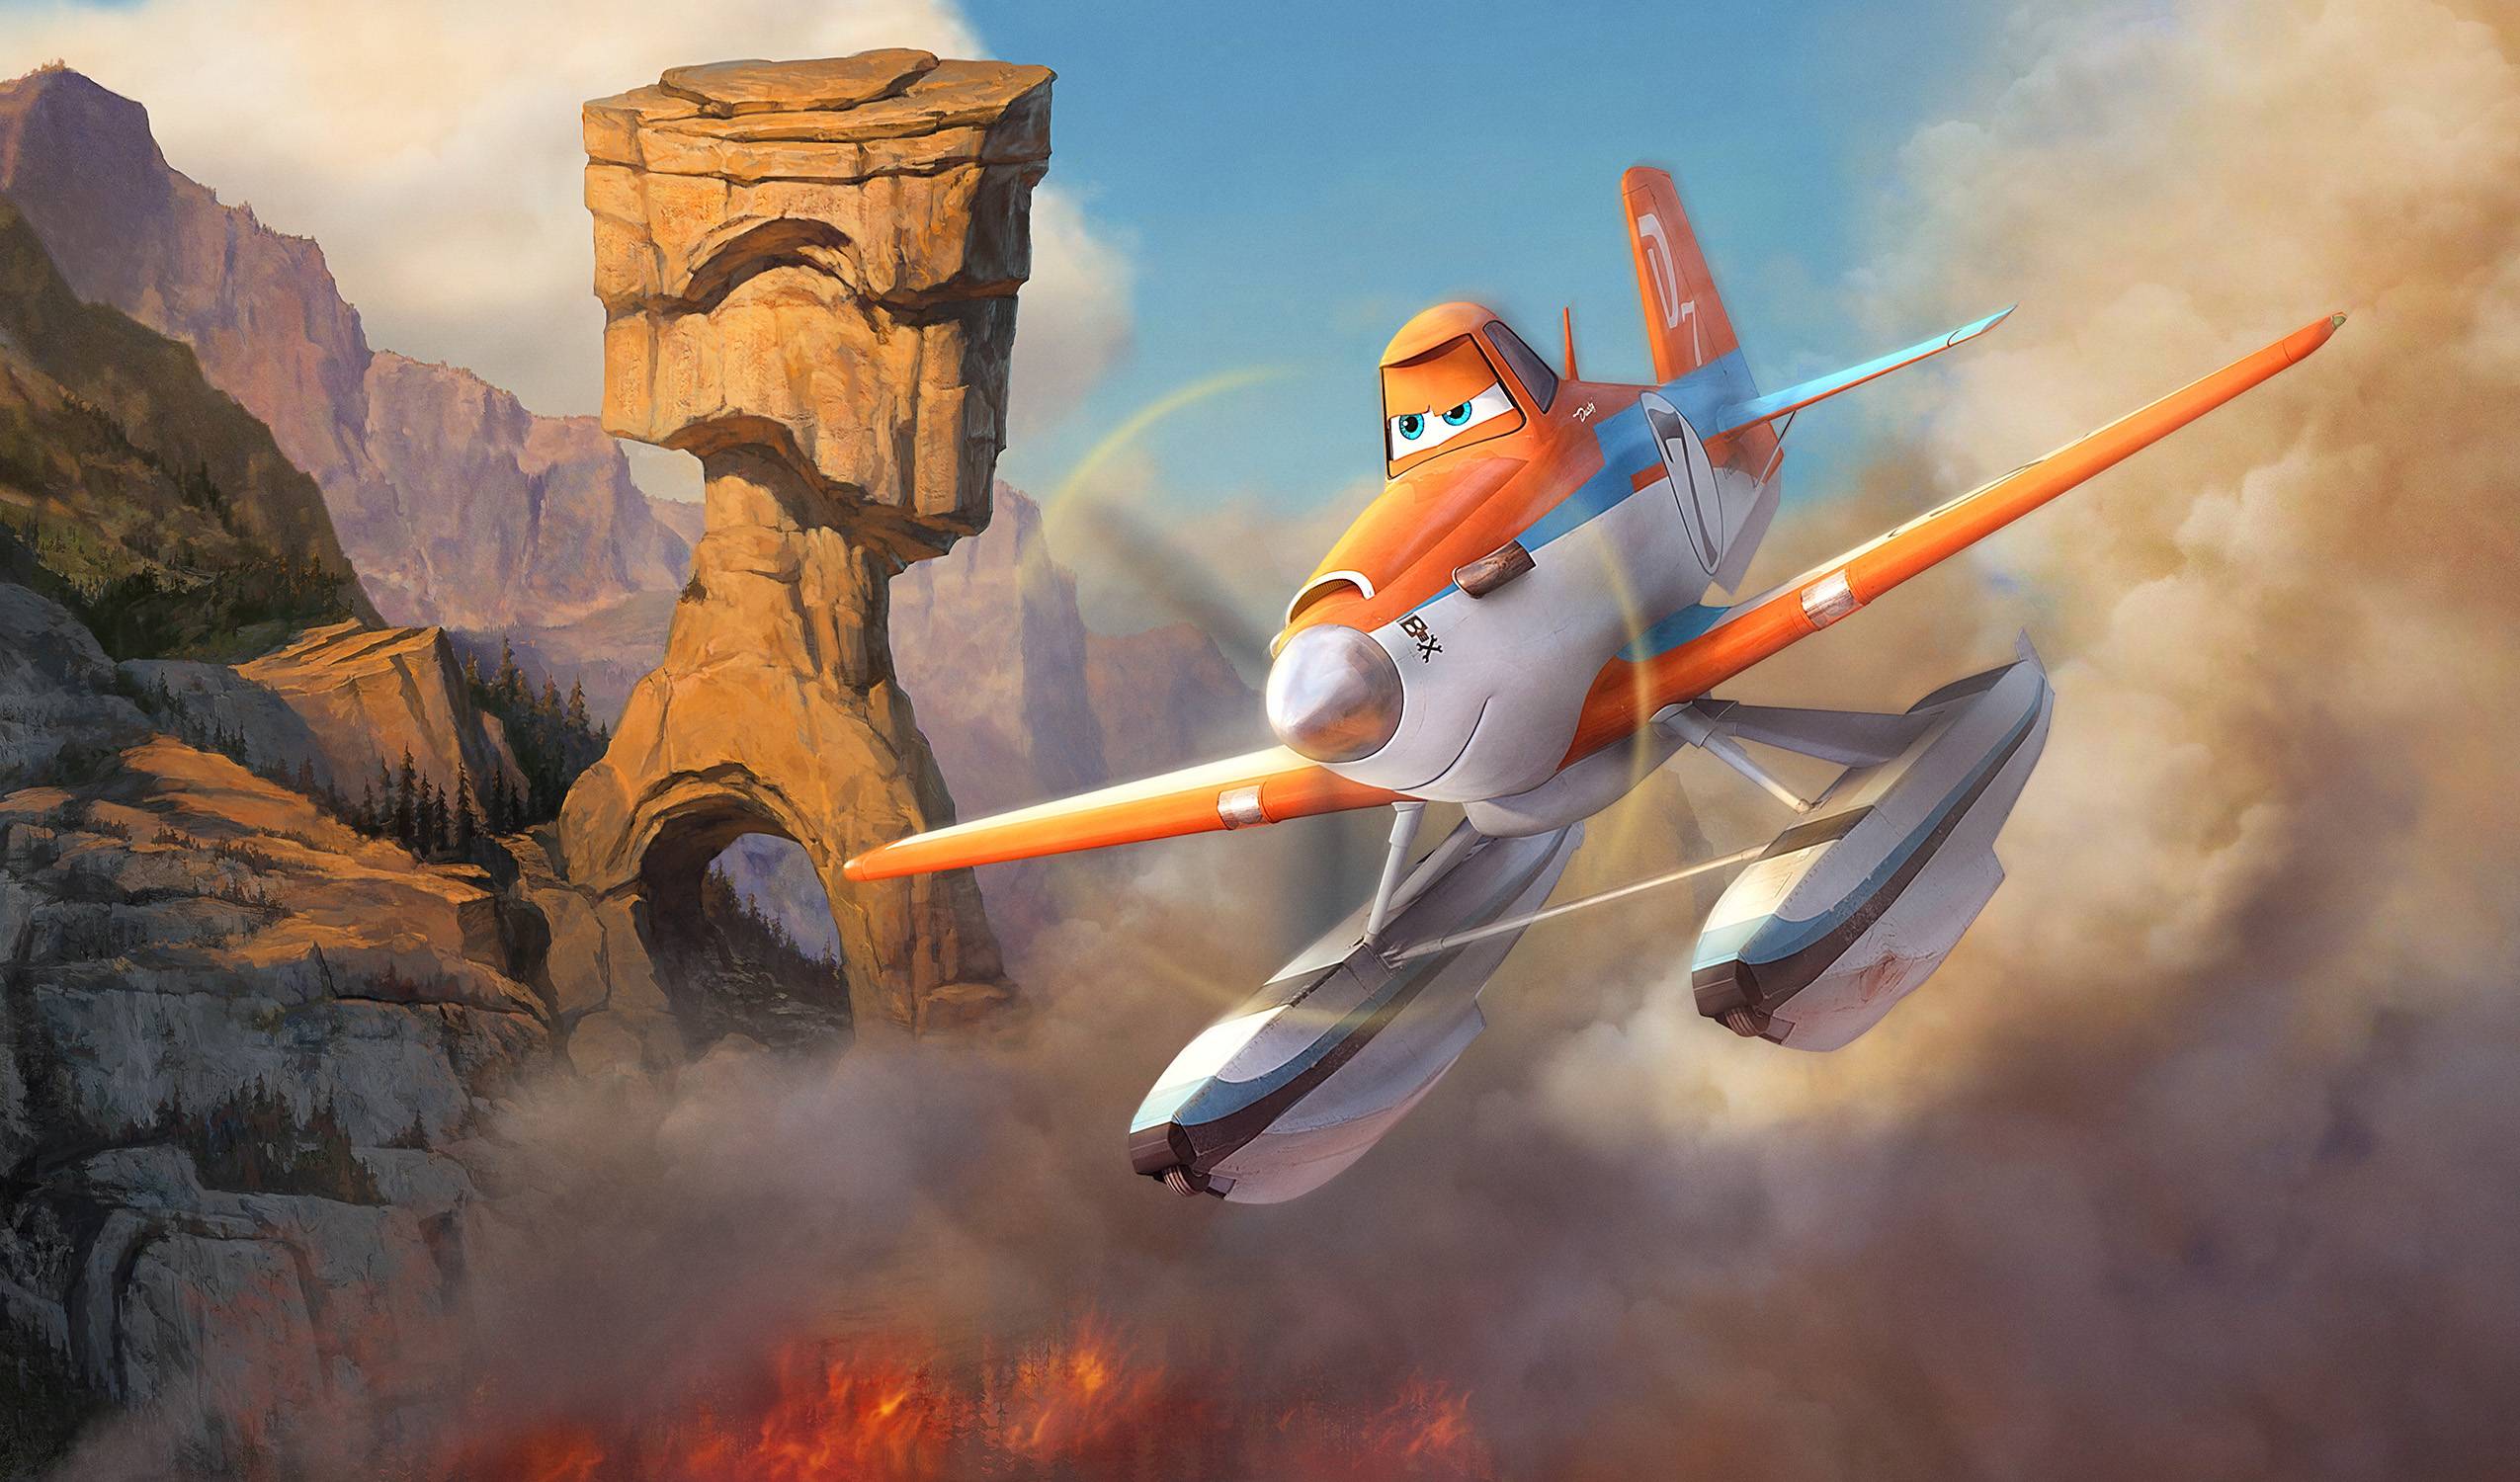 Wallpapers Planes: Fire and water cartoon comedy on the desktop